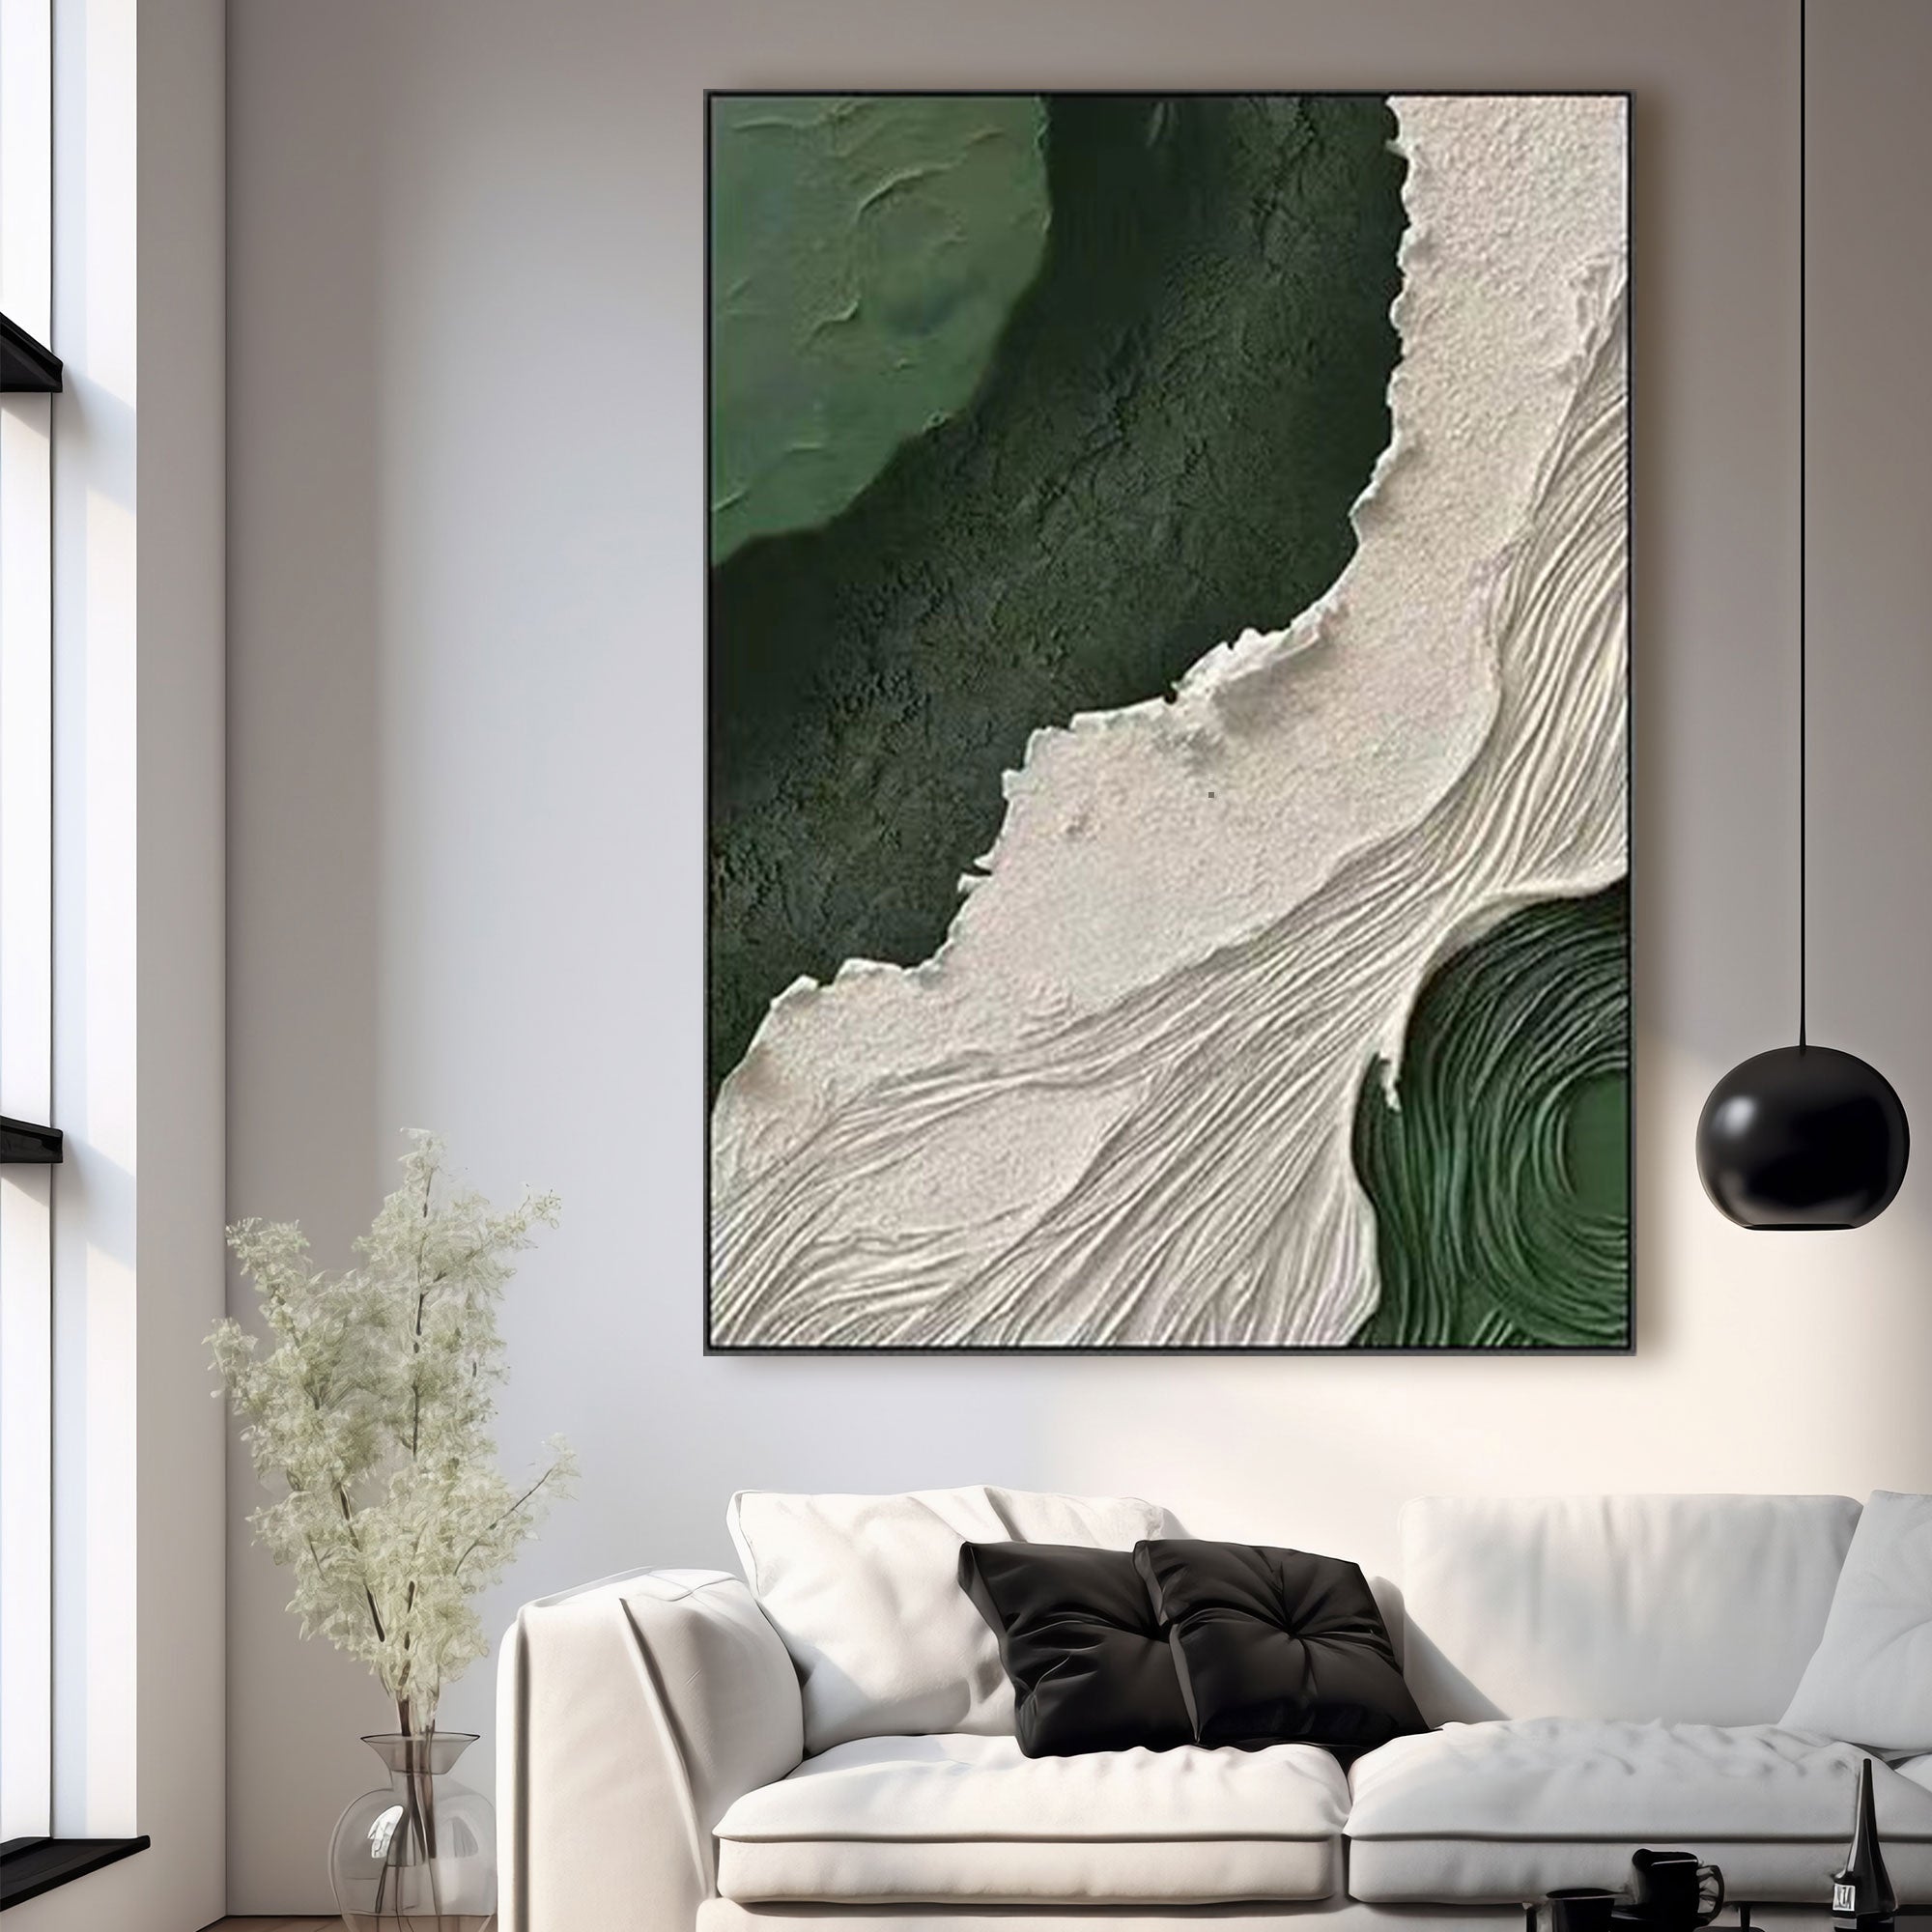 Plaster Painting “Confluence"